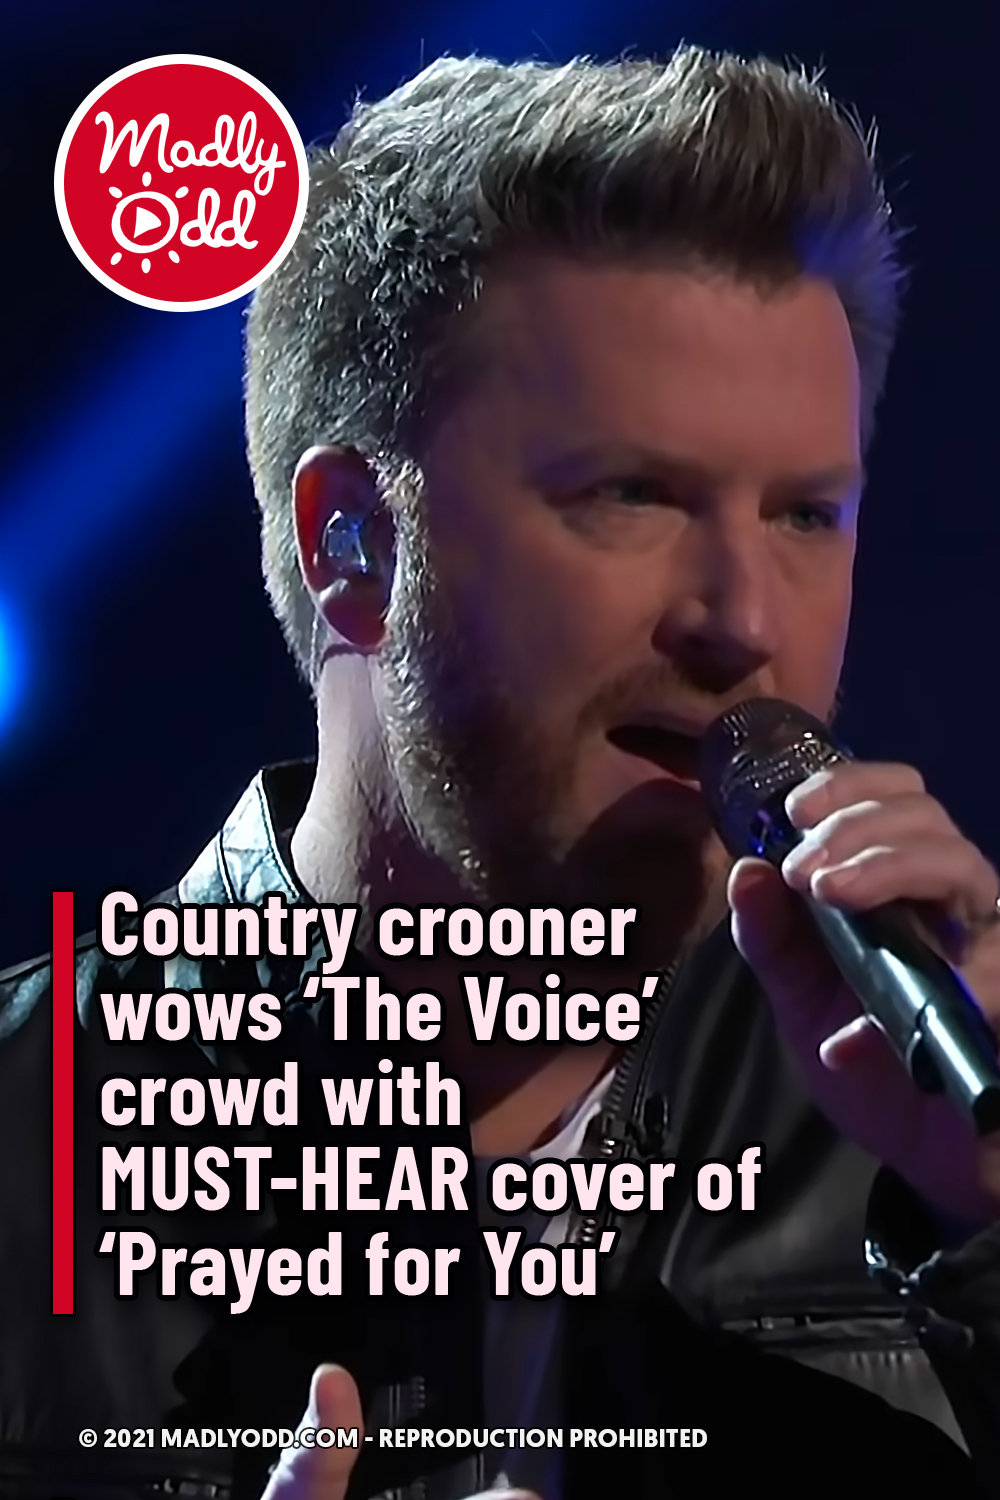 Country crooner wows ‘The Voice’ crowd with MUST-HEAR cover of ‘Prayed for You’